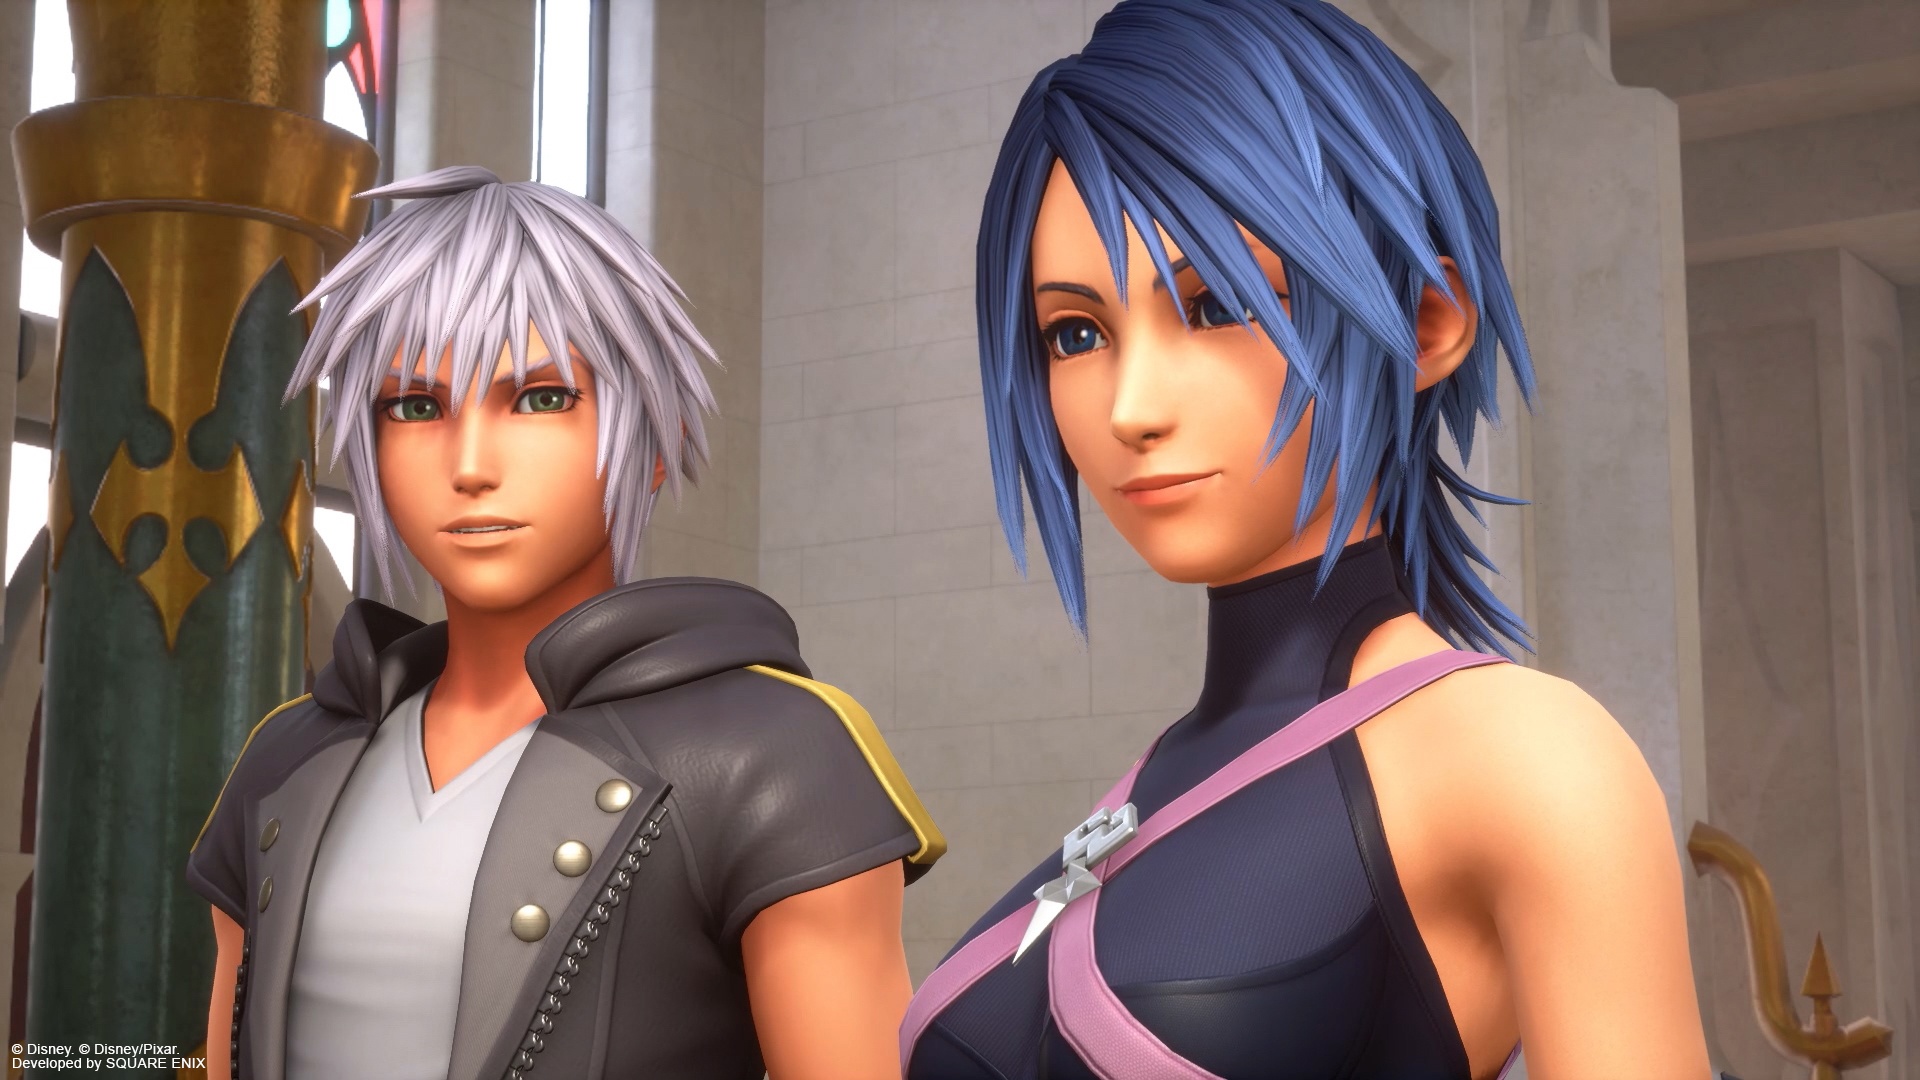 Kingdom Hearts III Developers Discuss the Re Mind DLC, Available